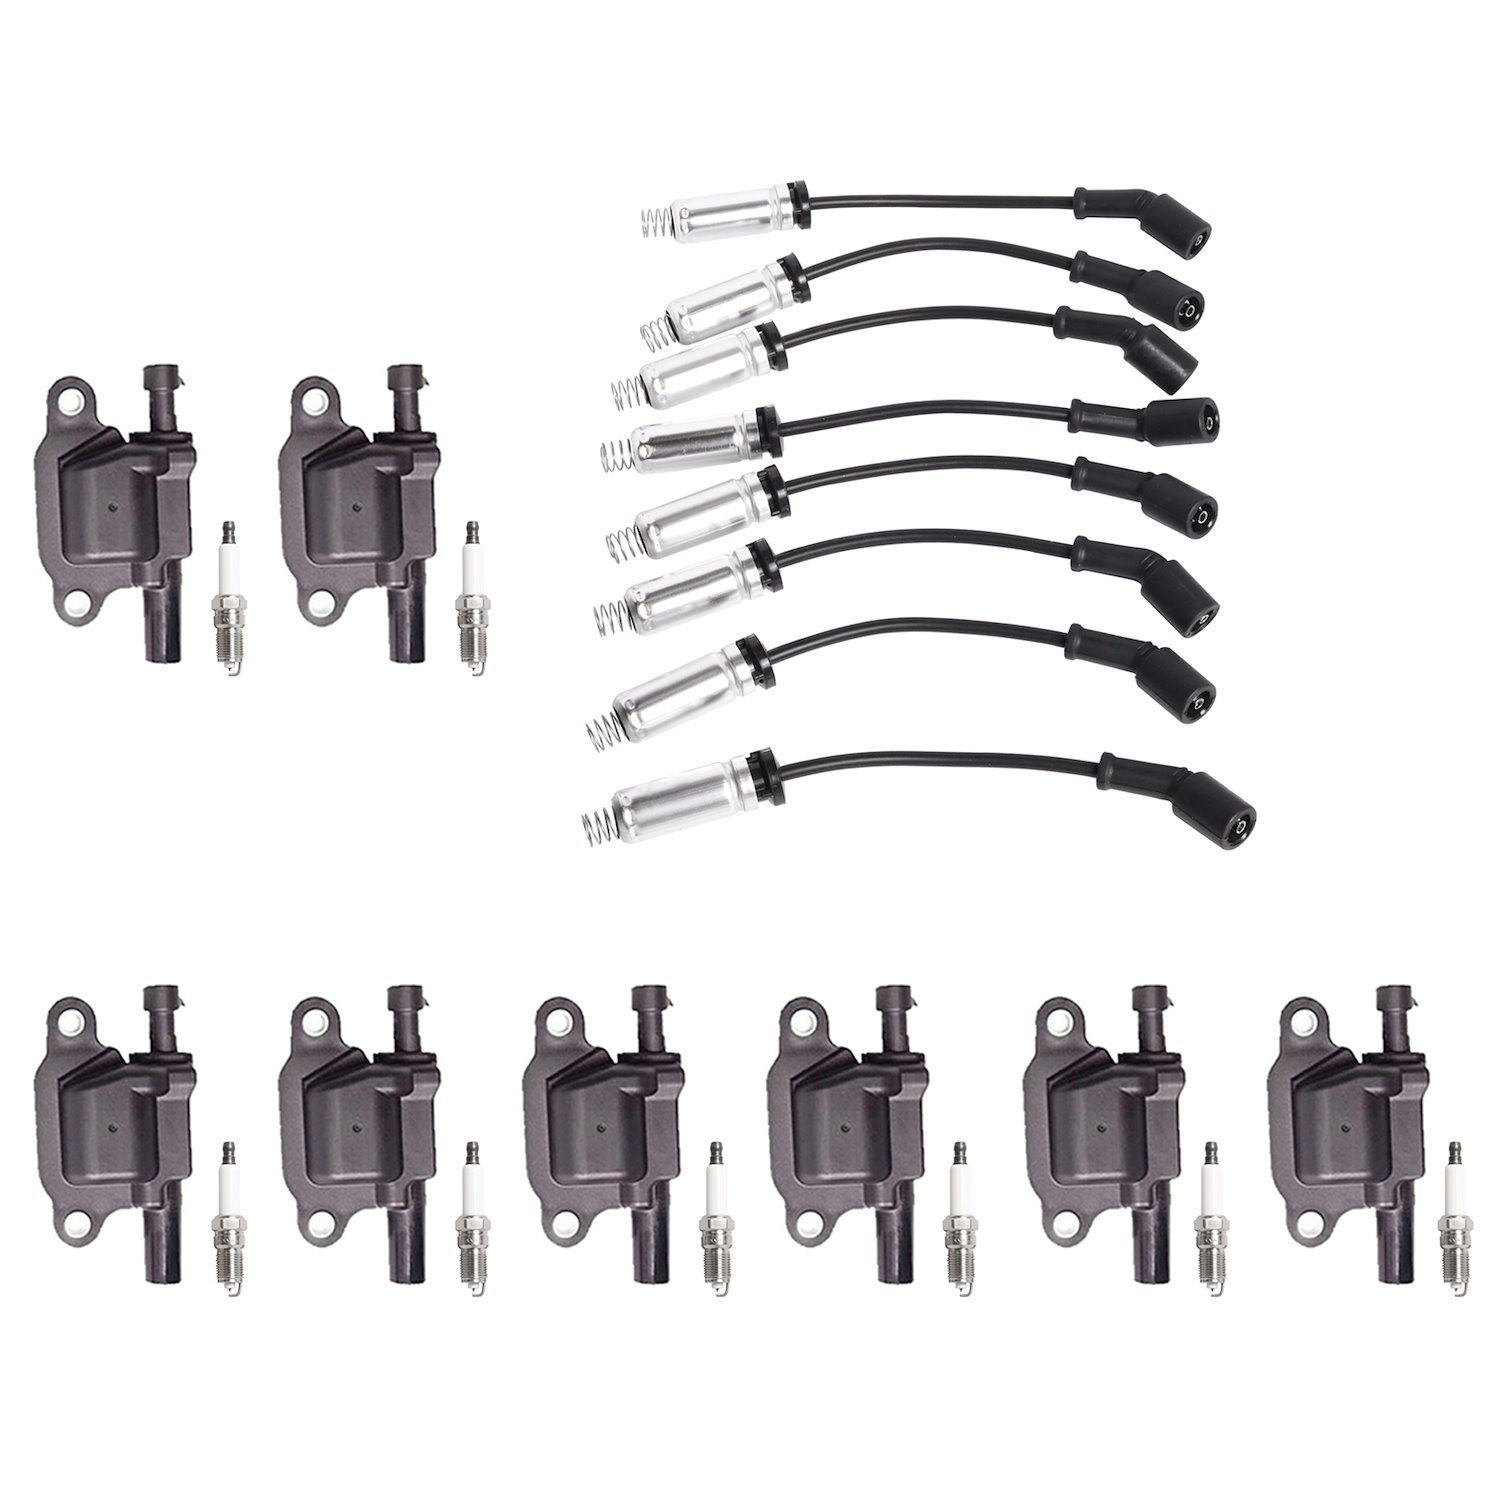 OE Replacement Ignition Coil, Spark Plug, and Spark Plug Wire Kit, GM 5.3/6.0/6.2L V8